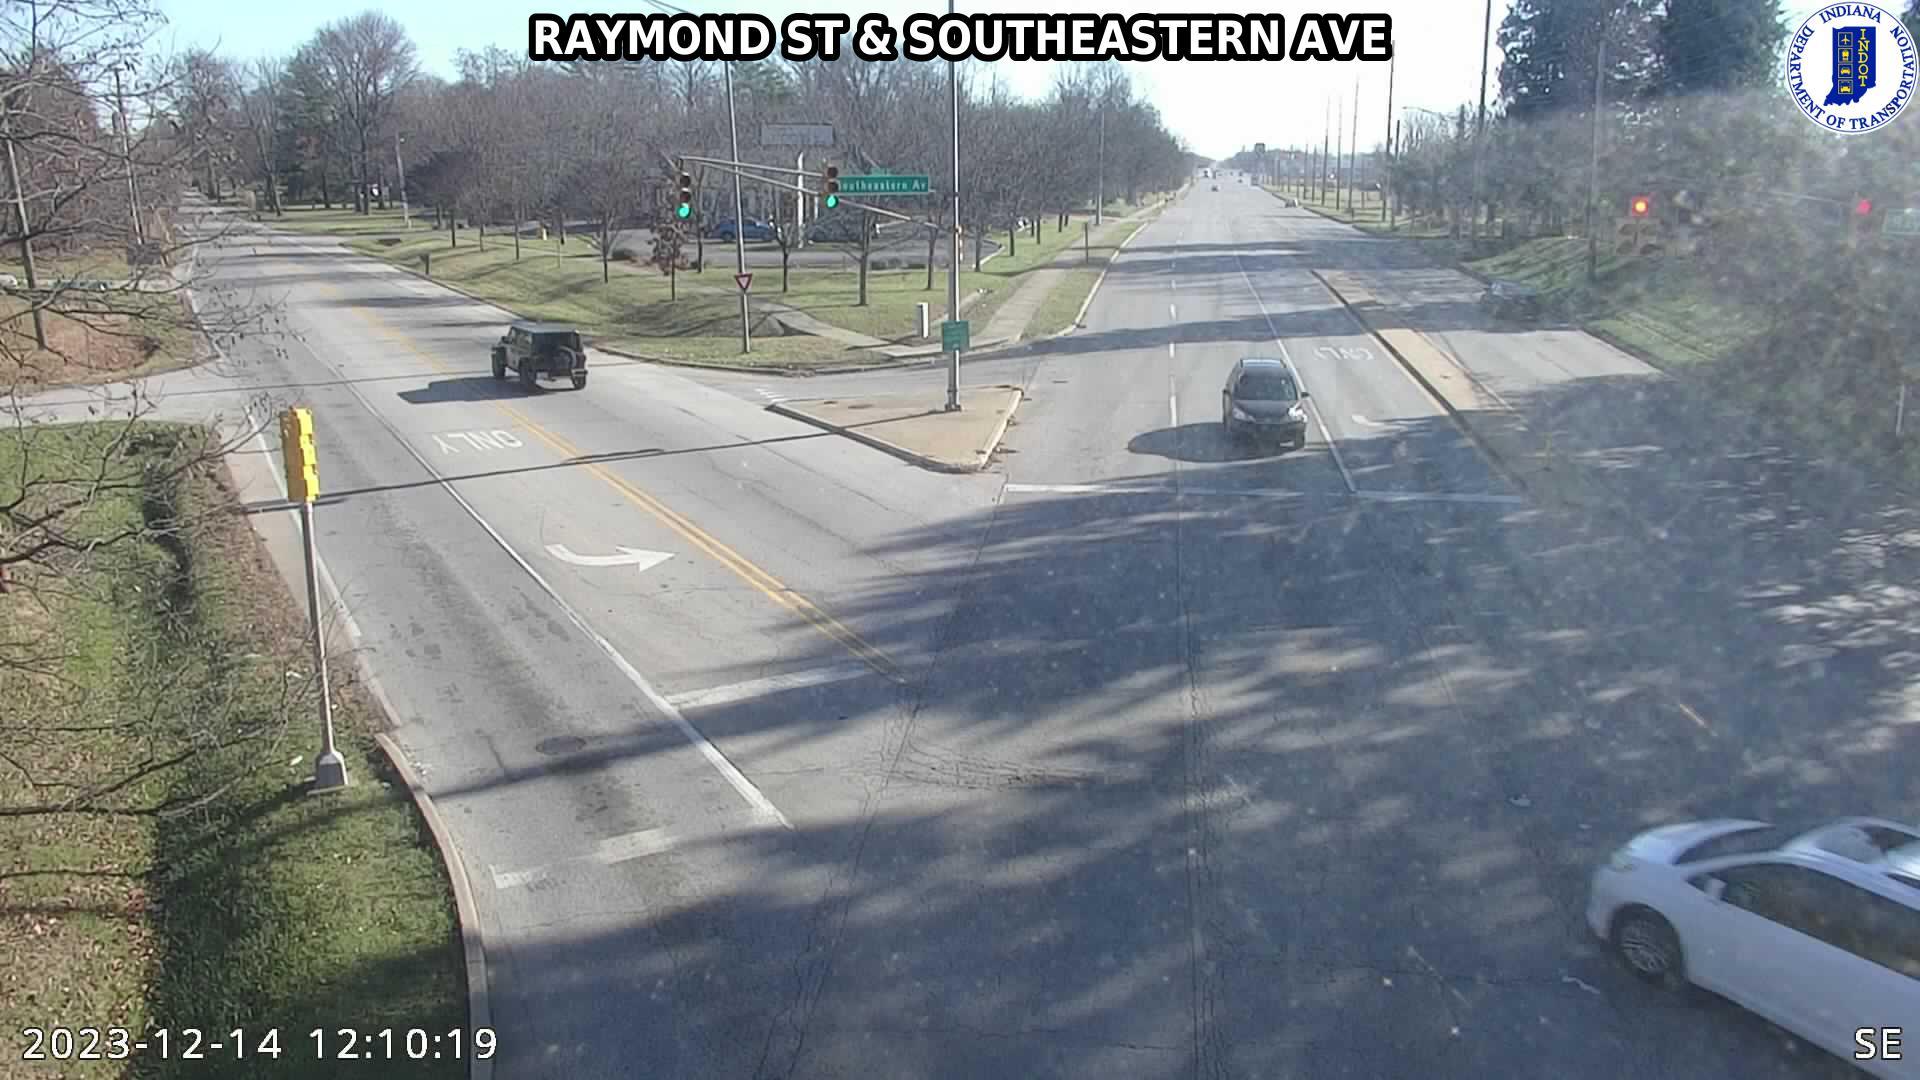 Traffic Cam Indianapolis: SIGNAL: RAYMOND ST & SOUTHEASTERN AVE